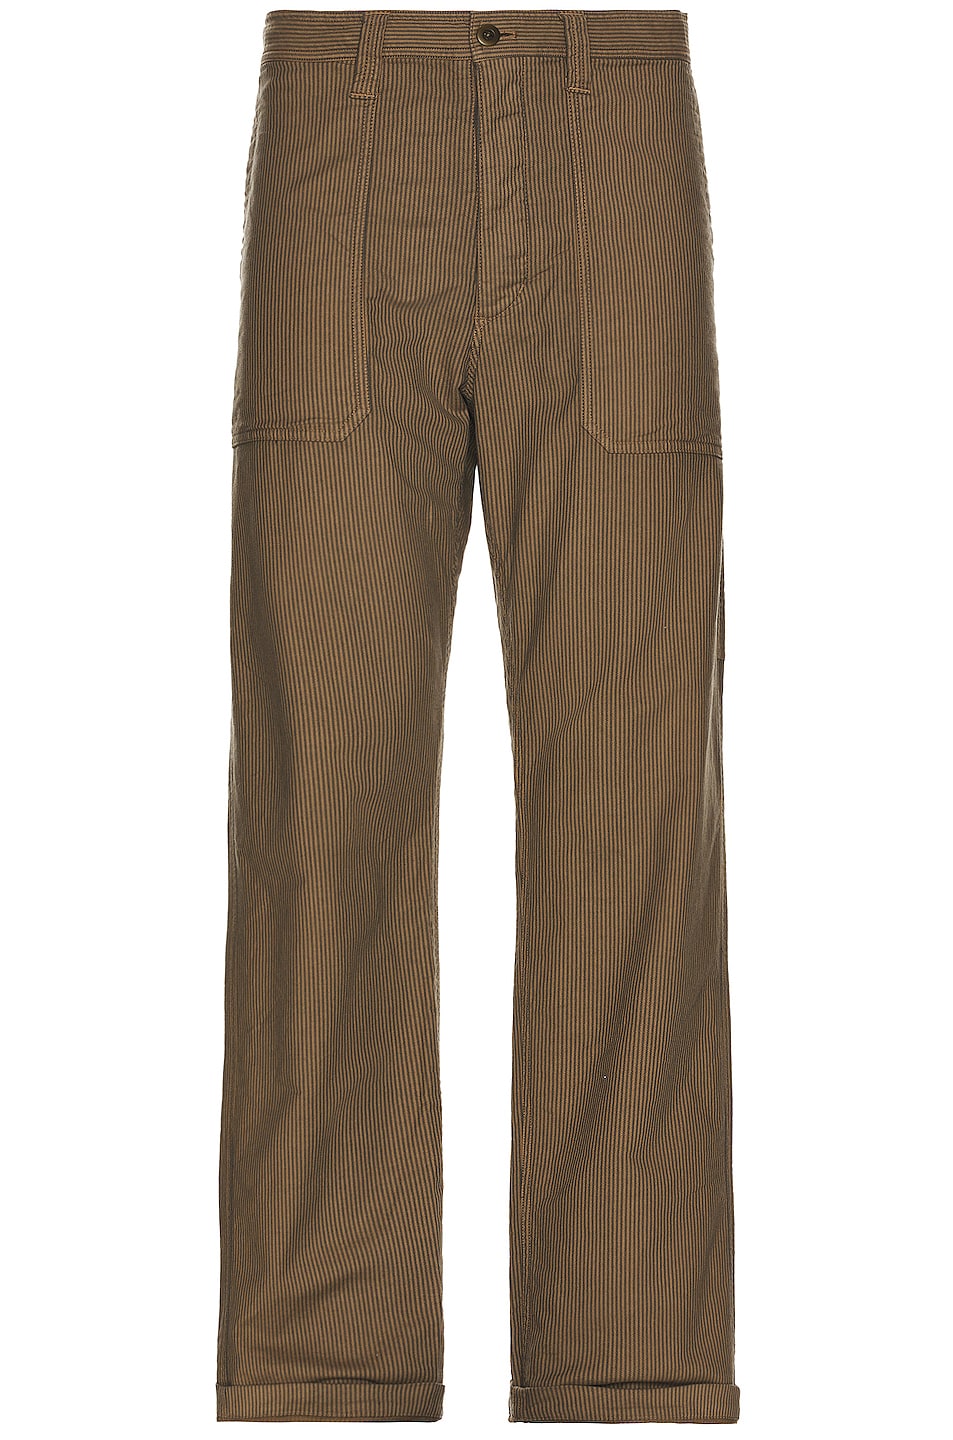 Image 1 of TS(S) Garment Dye Fatigue Pants in Olive